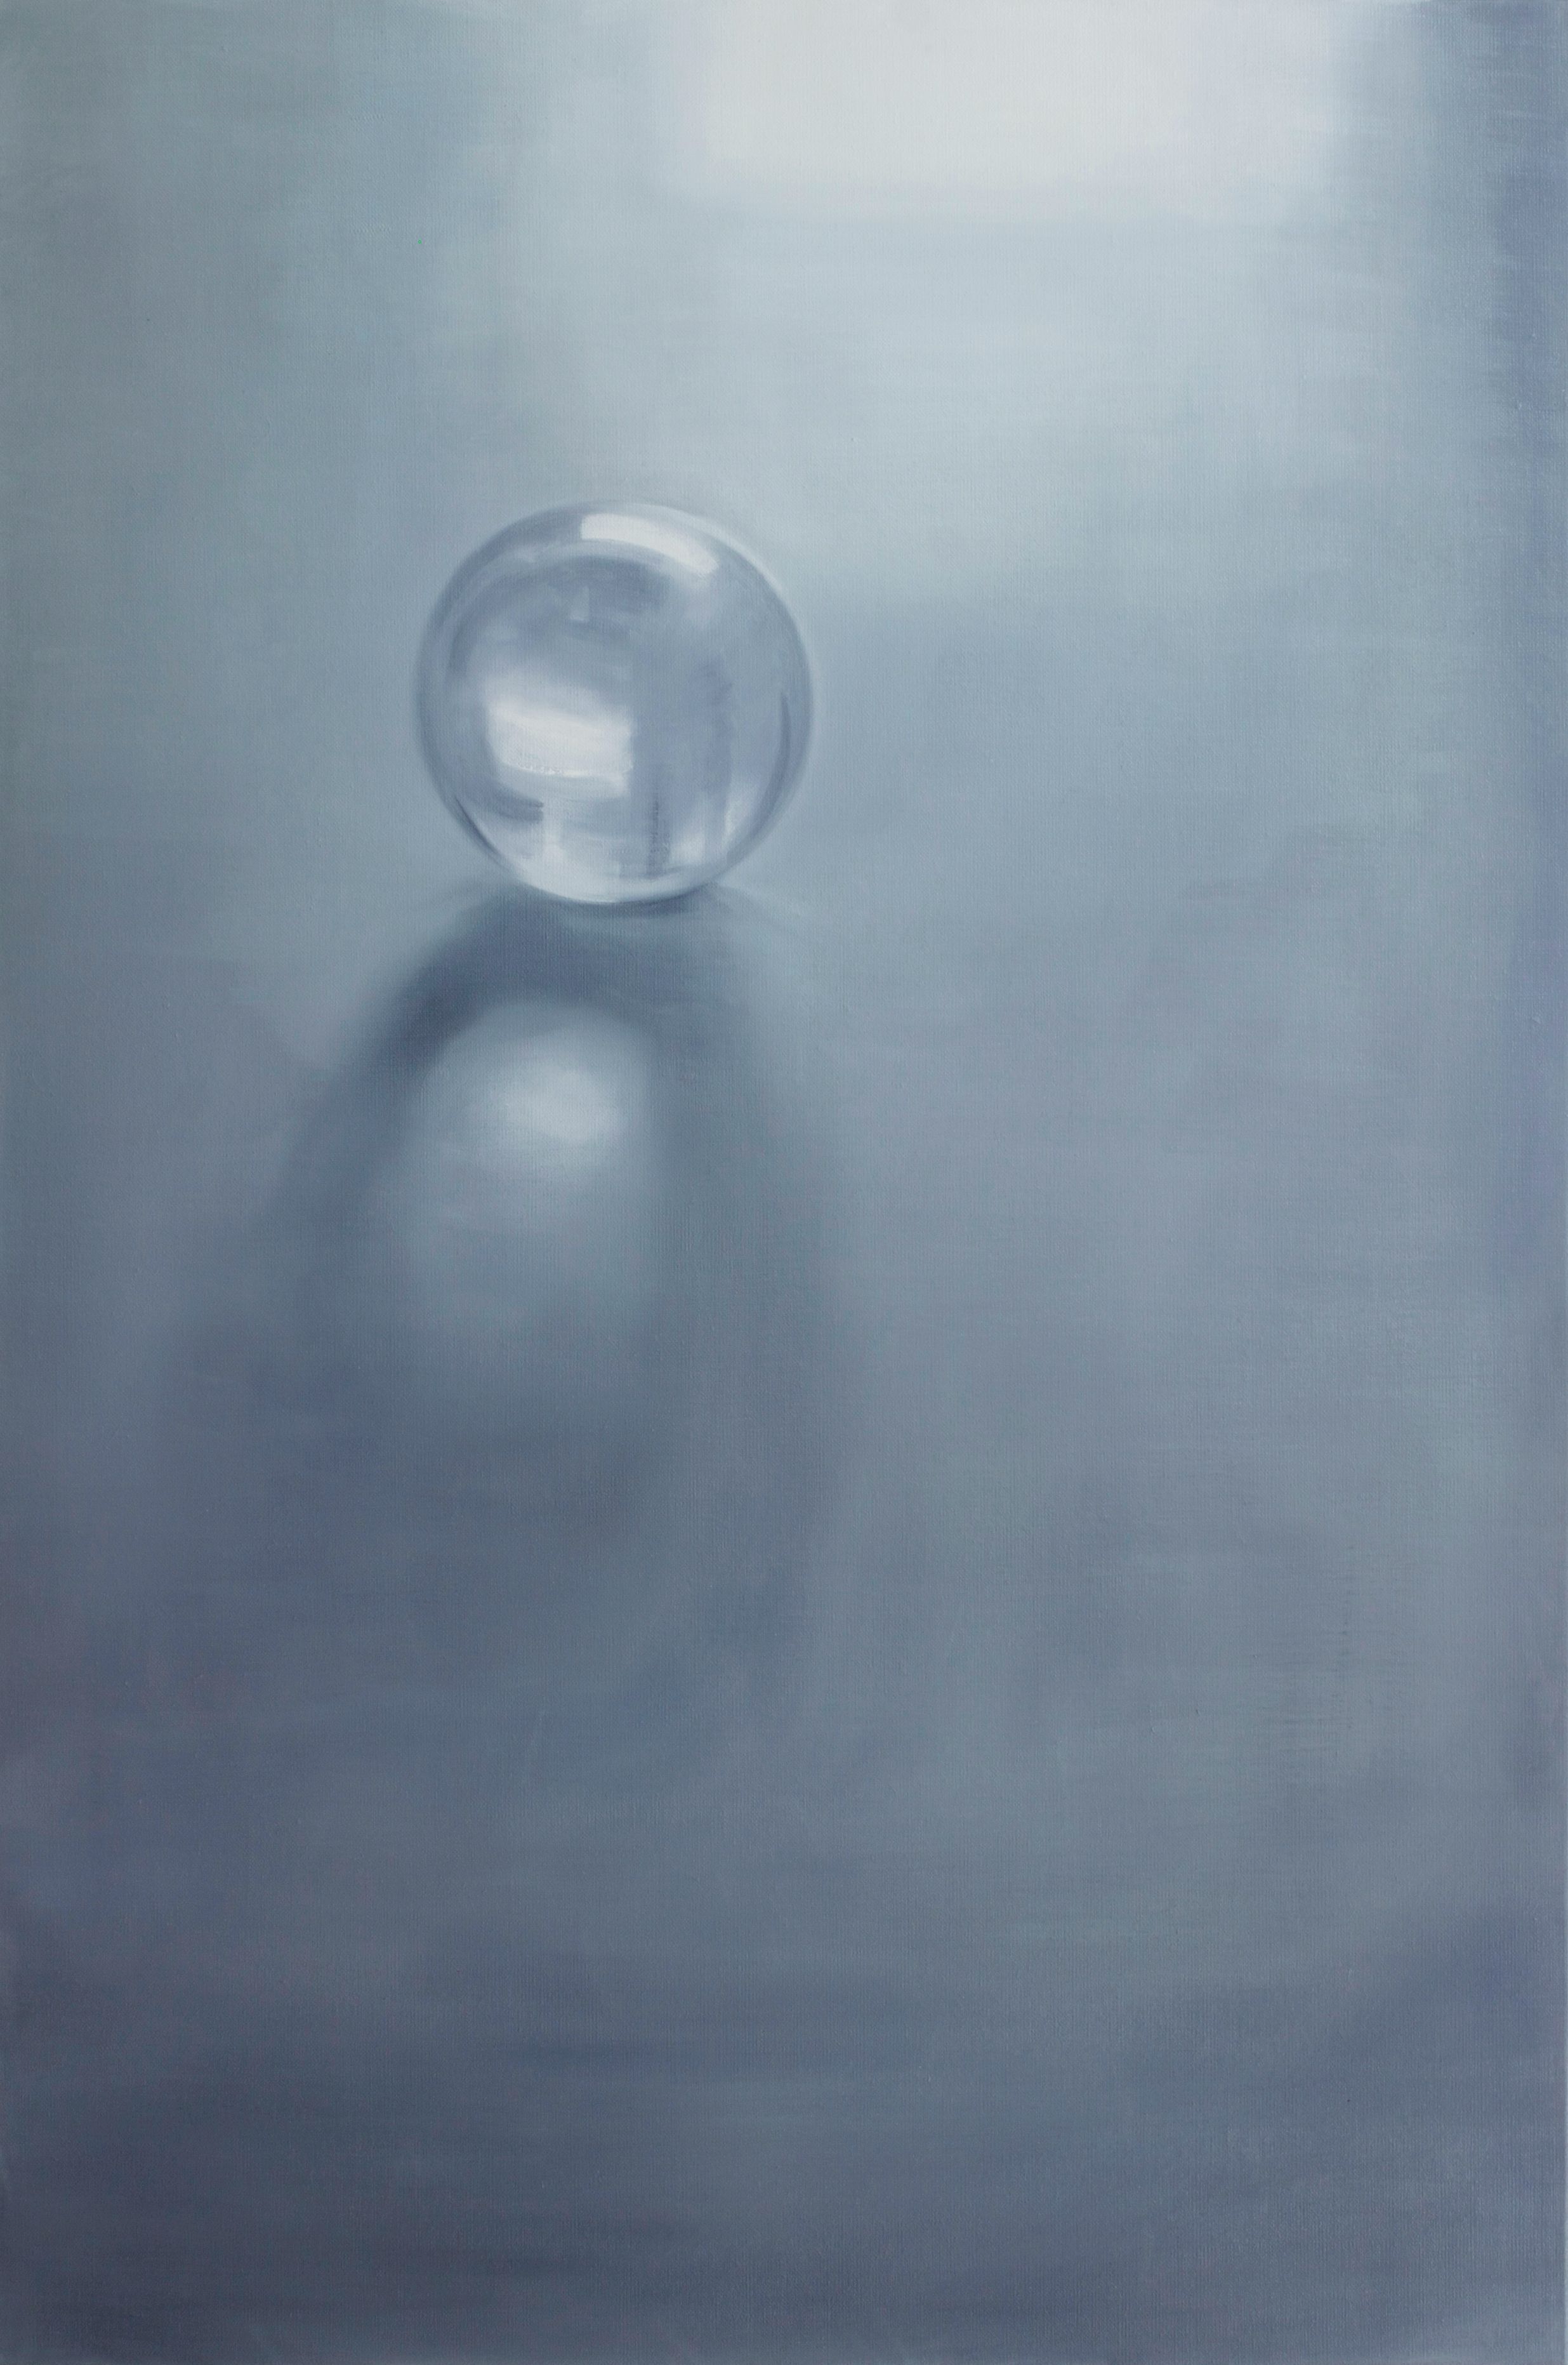 Miwa Ogasawara │ Glass Sphere 13 │ Oil on canvas │ 120 x 80 cm｜2016｜Collection of Yu-Hsiu Museum of Art